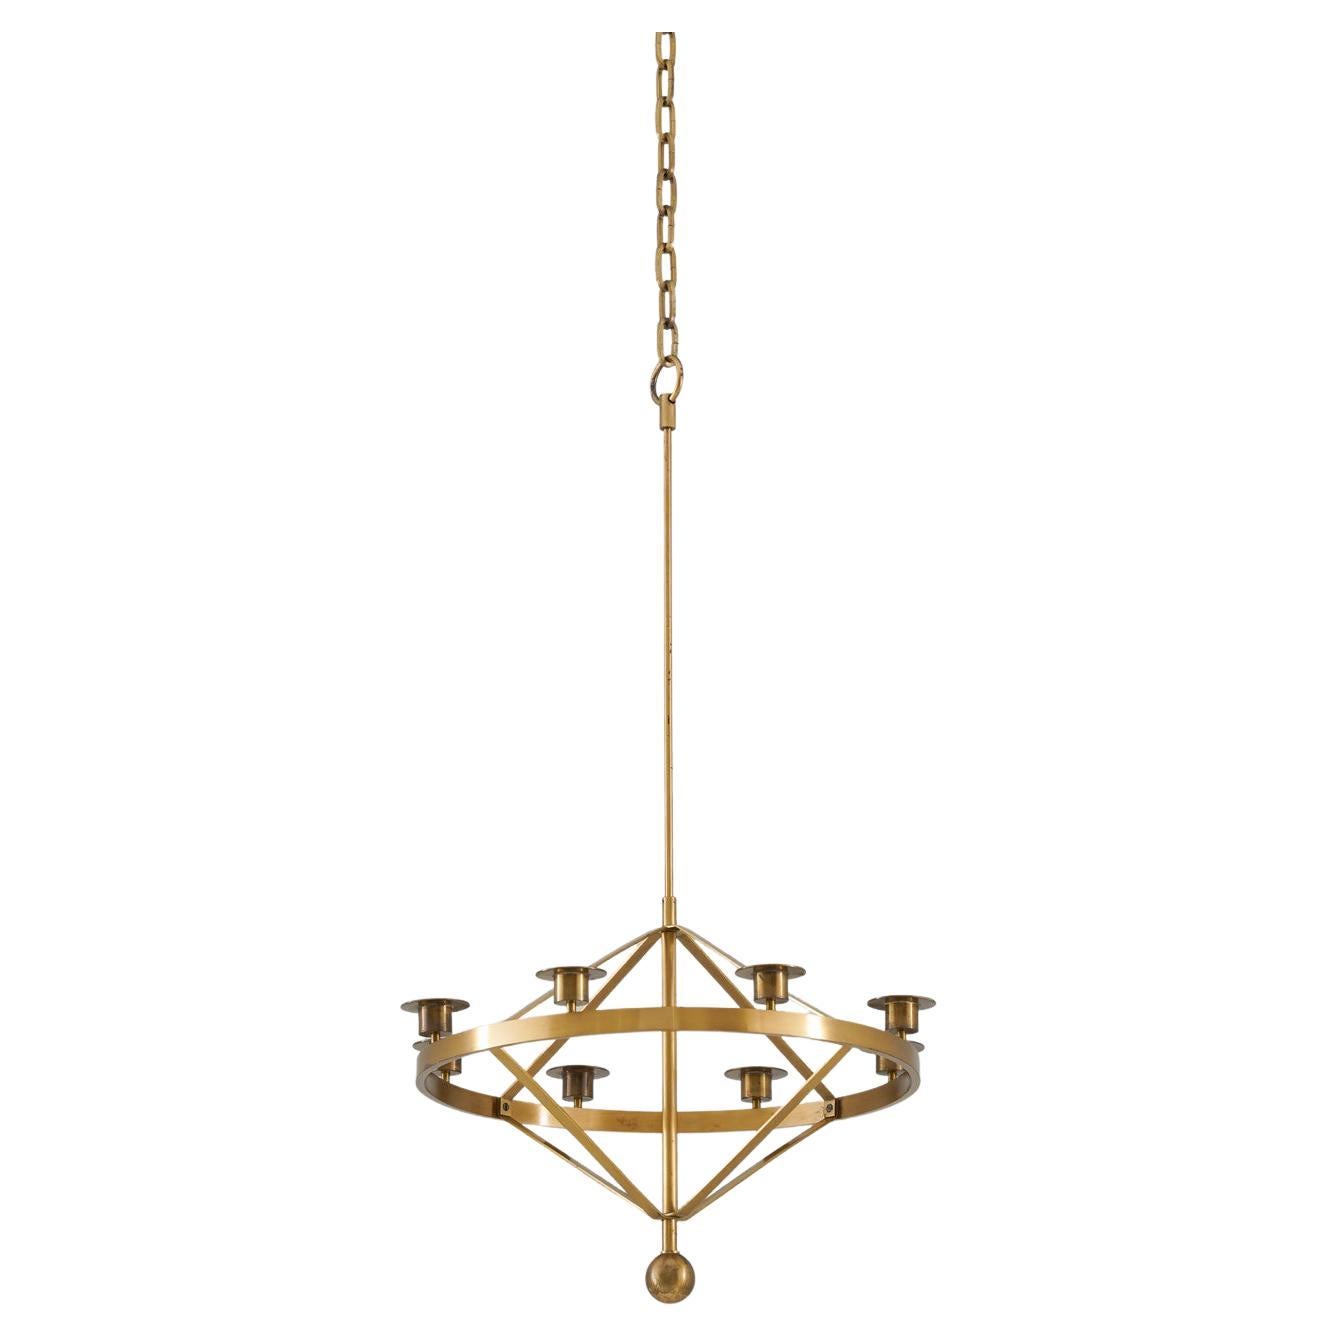 Swedish Candle Chandelier by Sigurd Persson